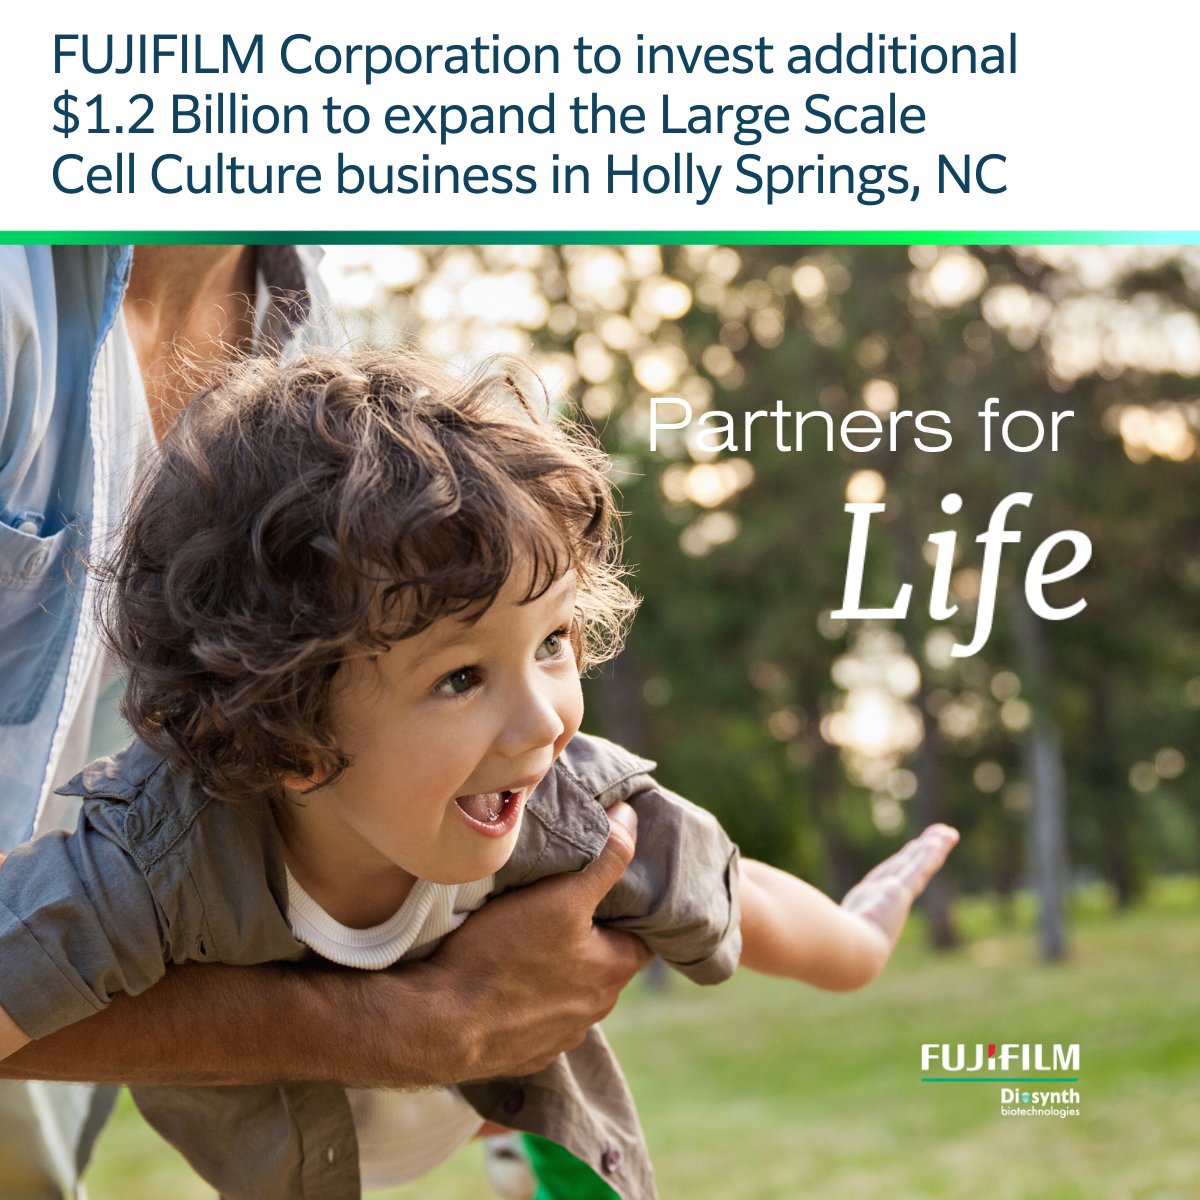 FUJIFILM Corporation to invest additional $1.2 Billion to expand the Large Scale Cell Culture business in Holly Springs, NC. This investment aims to create 680 new highly skilled local jobs by 2031. Read More: